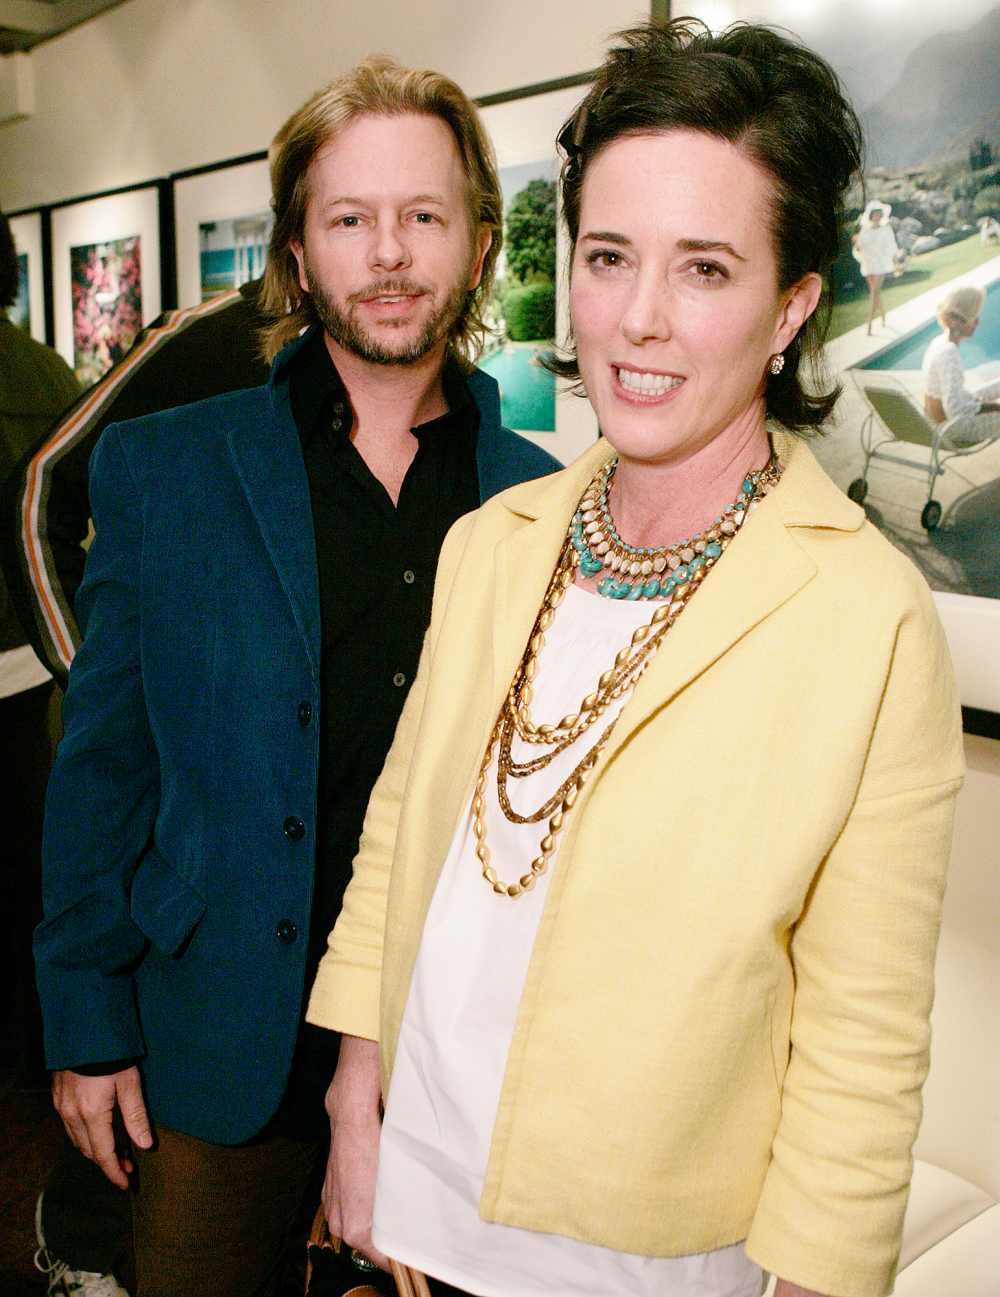 Inside Kate Spade's life of professional triumph and personal turmoil